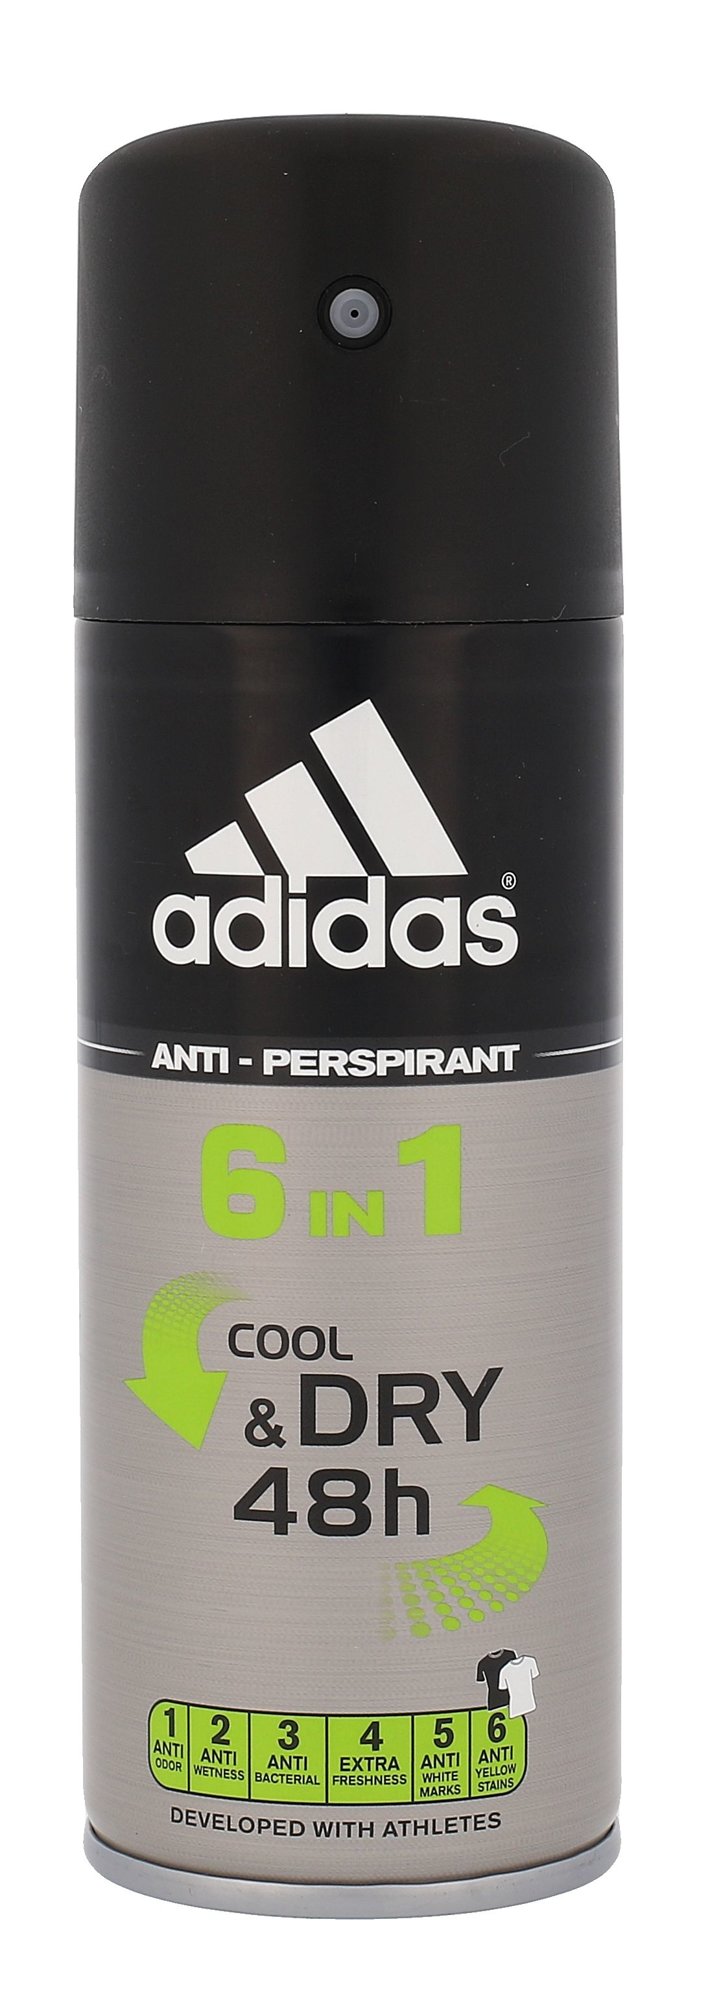 Adidas 6in1 Cool & Dry 48h